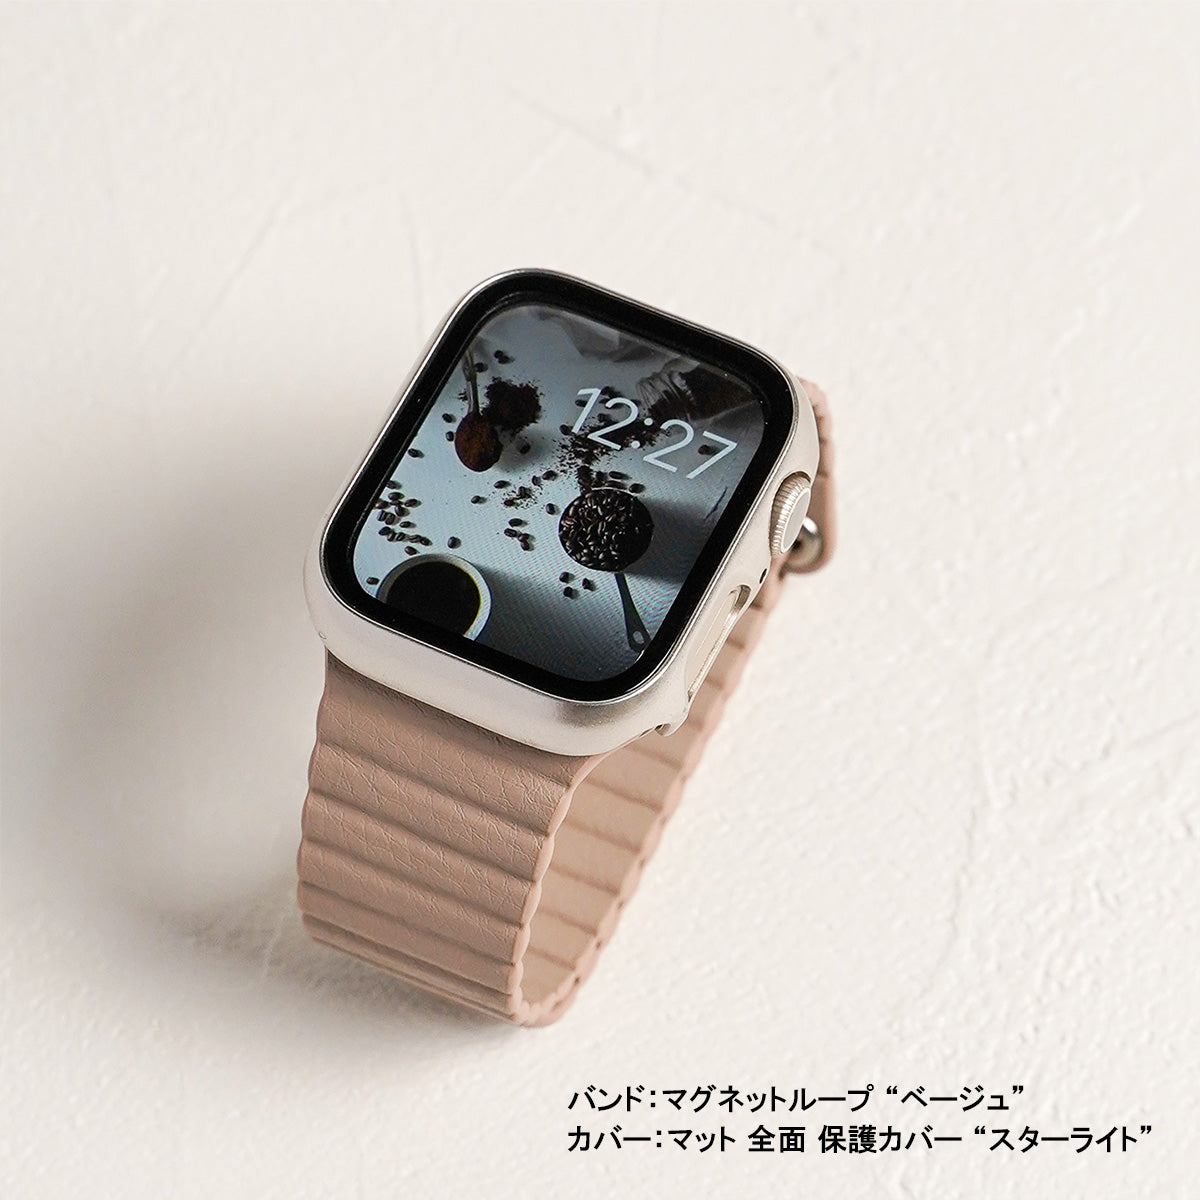 Matte Full Protective Cover Hard Type Apple Watch Case Apple Watch